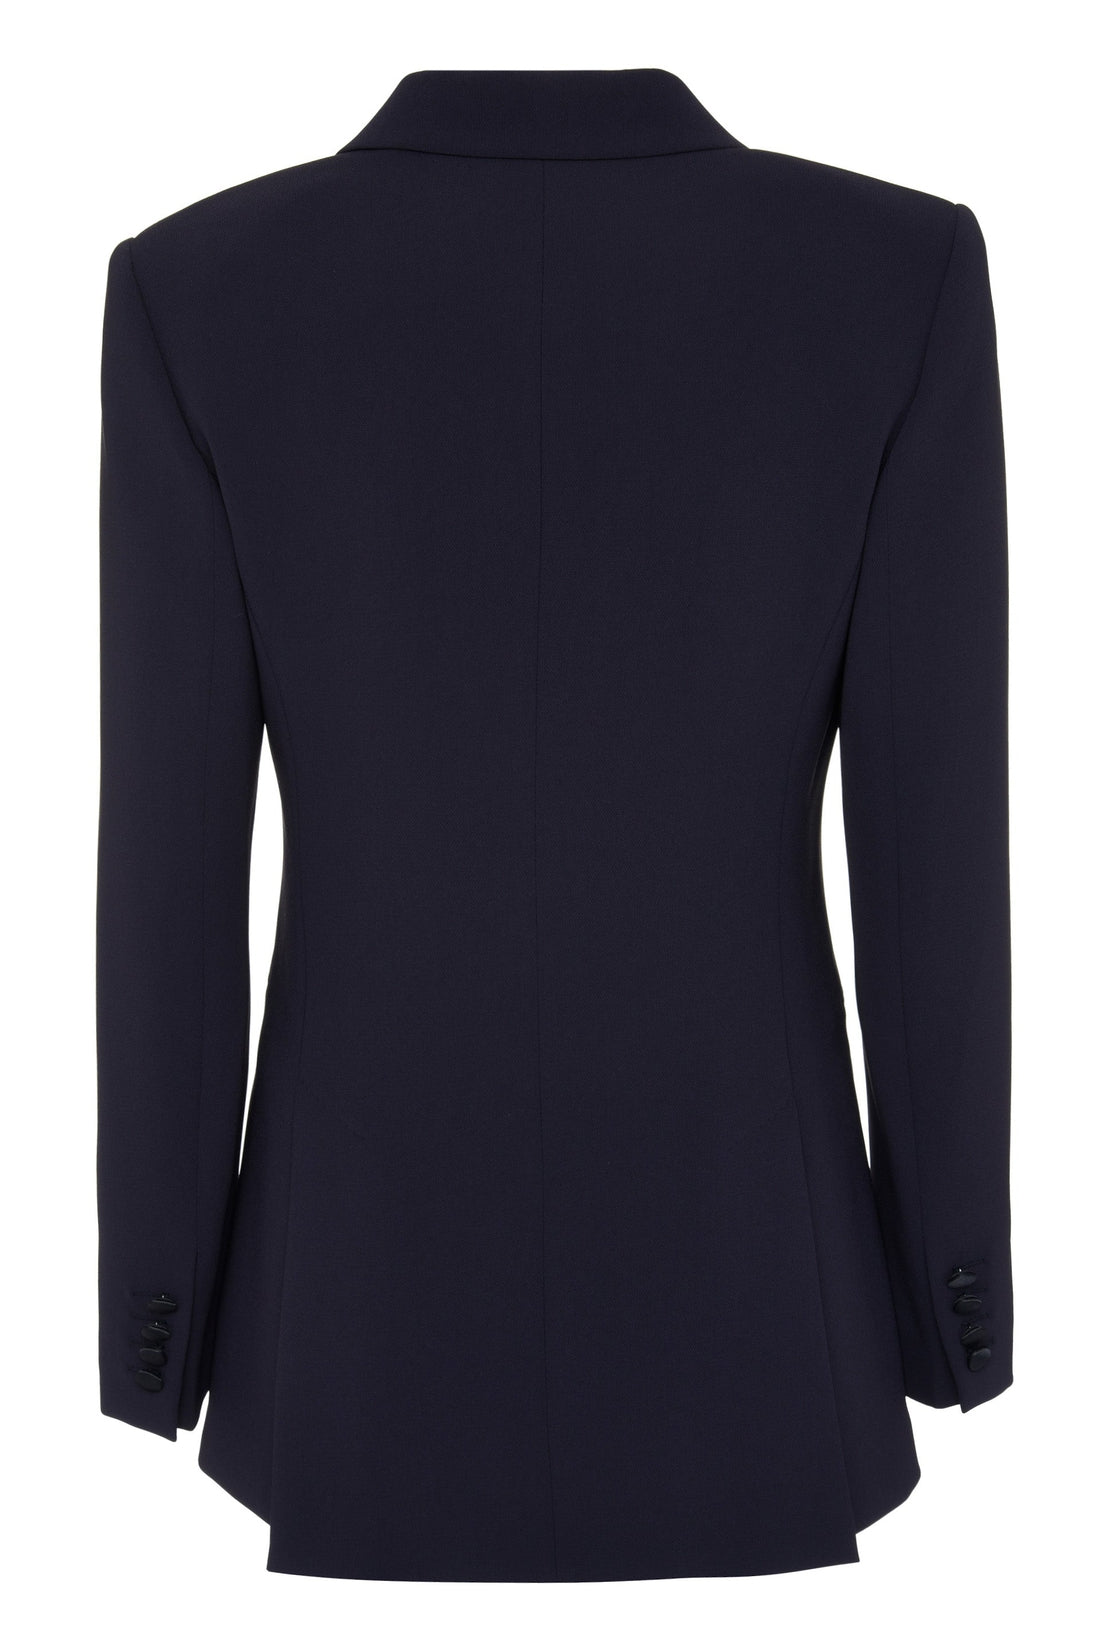 Max Mara-OUTLET-SALE-Lolly double breasted blazer-ARCHIVIST